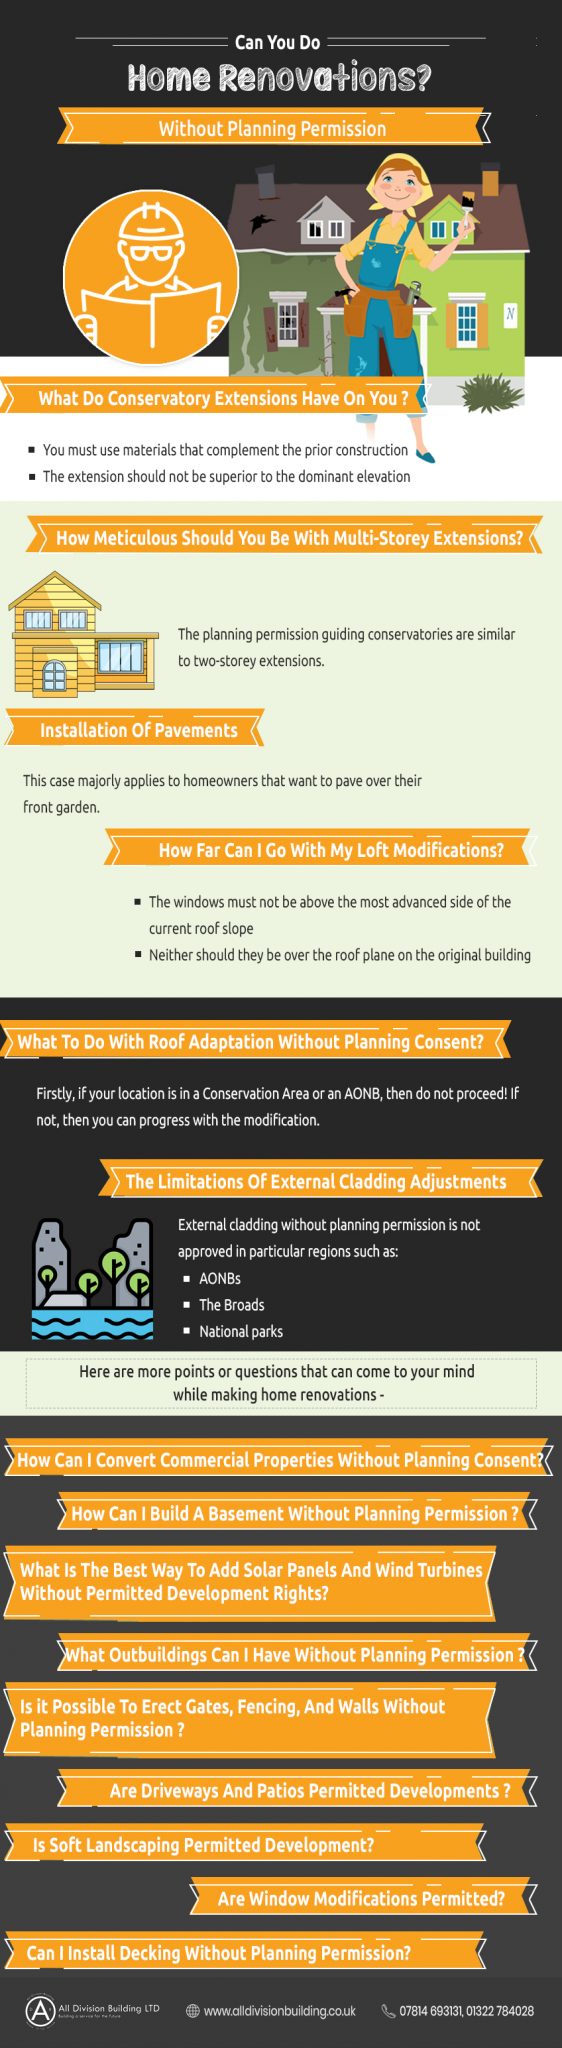 Home Renovations Infographic